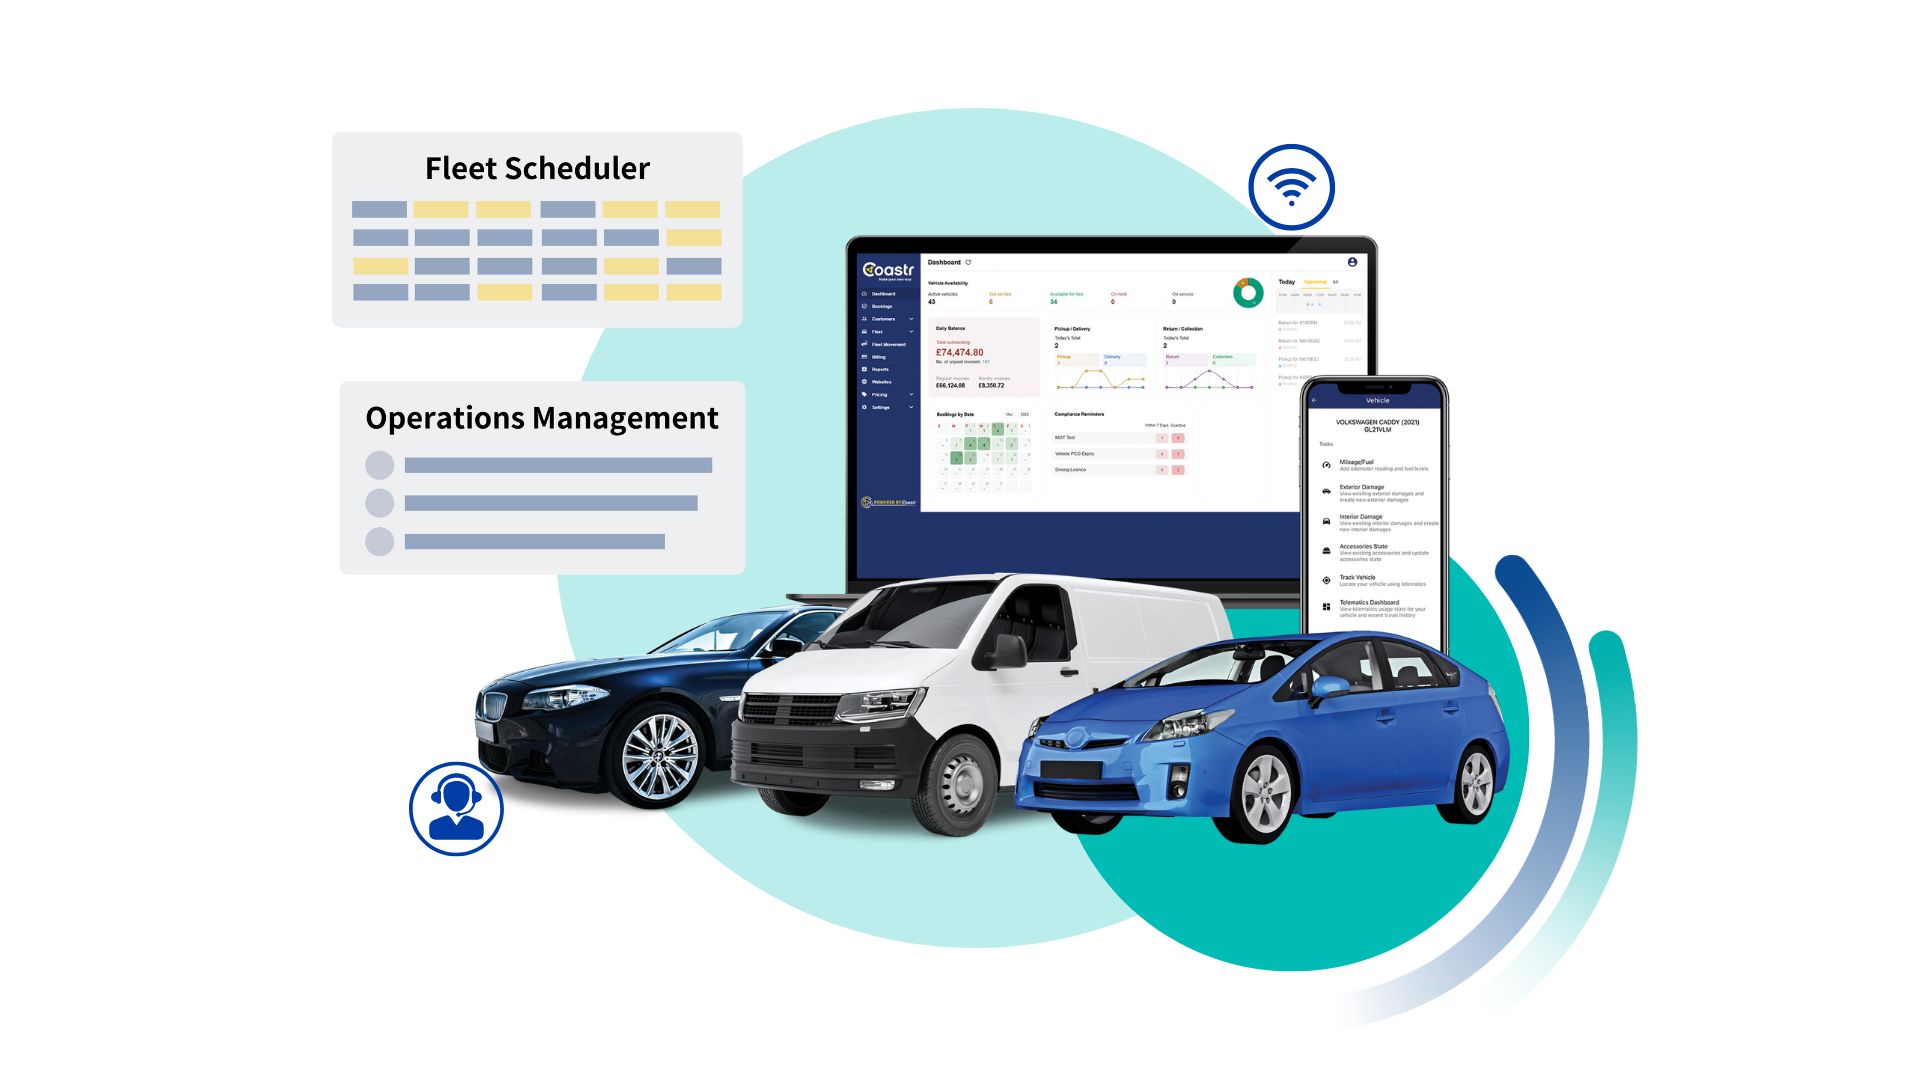 Coastr is digitising the vehicle rental, flexi leasing, car subscription, and car sharing ecosystem with its hyperconnected, shared mobility platform for vehicle rental and fleet management.